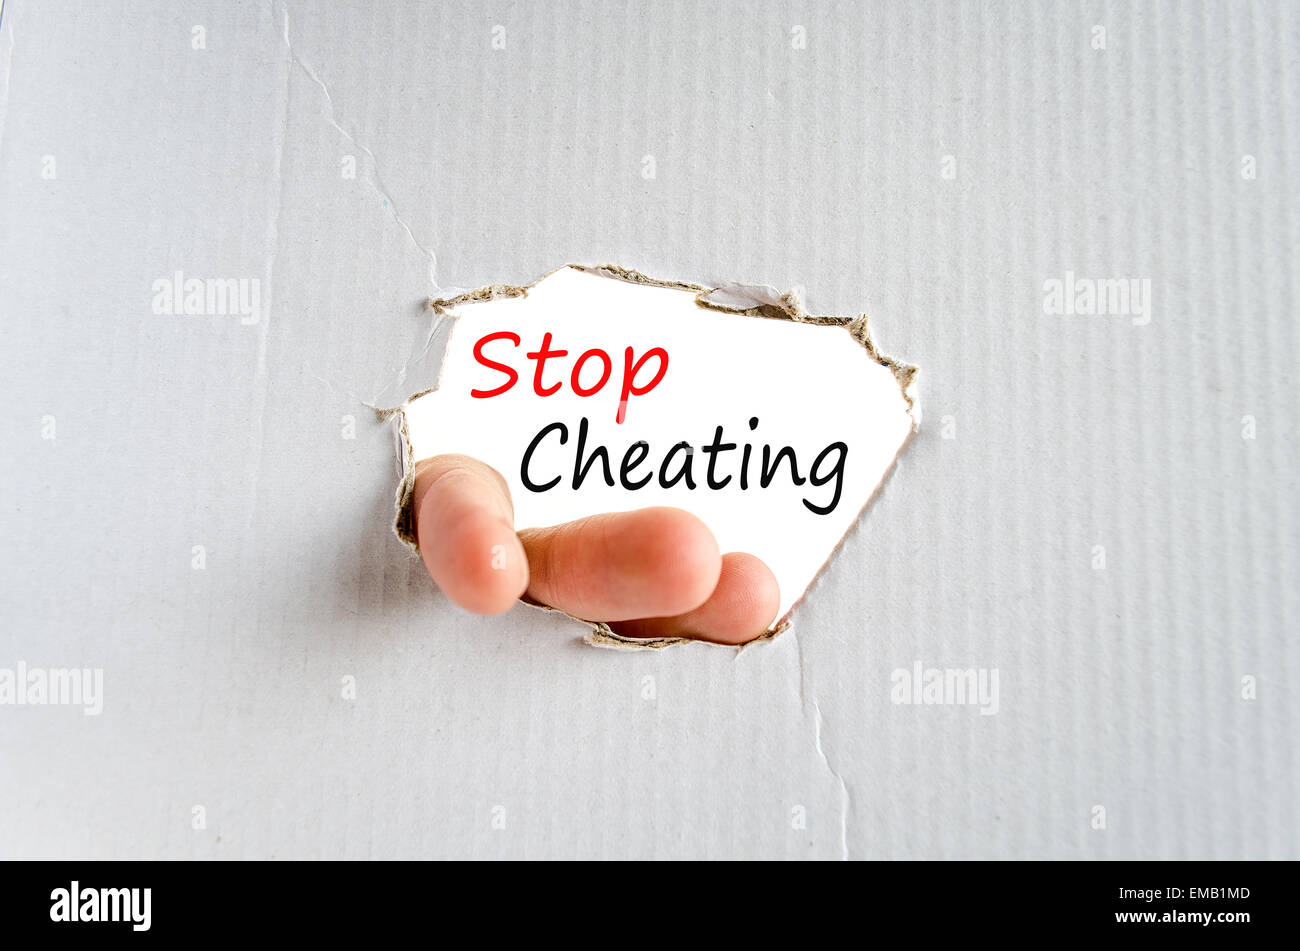 Stop Cheating Concept Isolated Over White Background Stock Photo